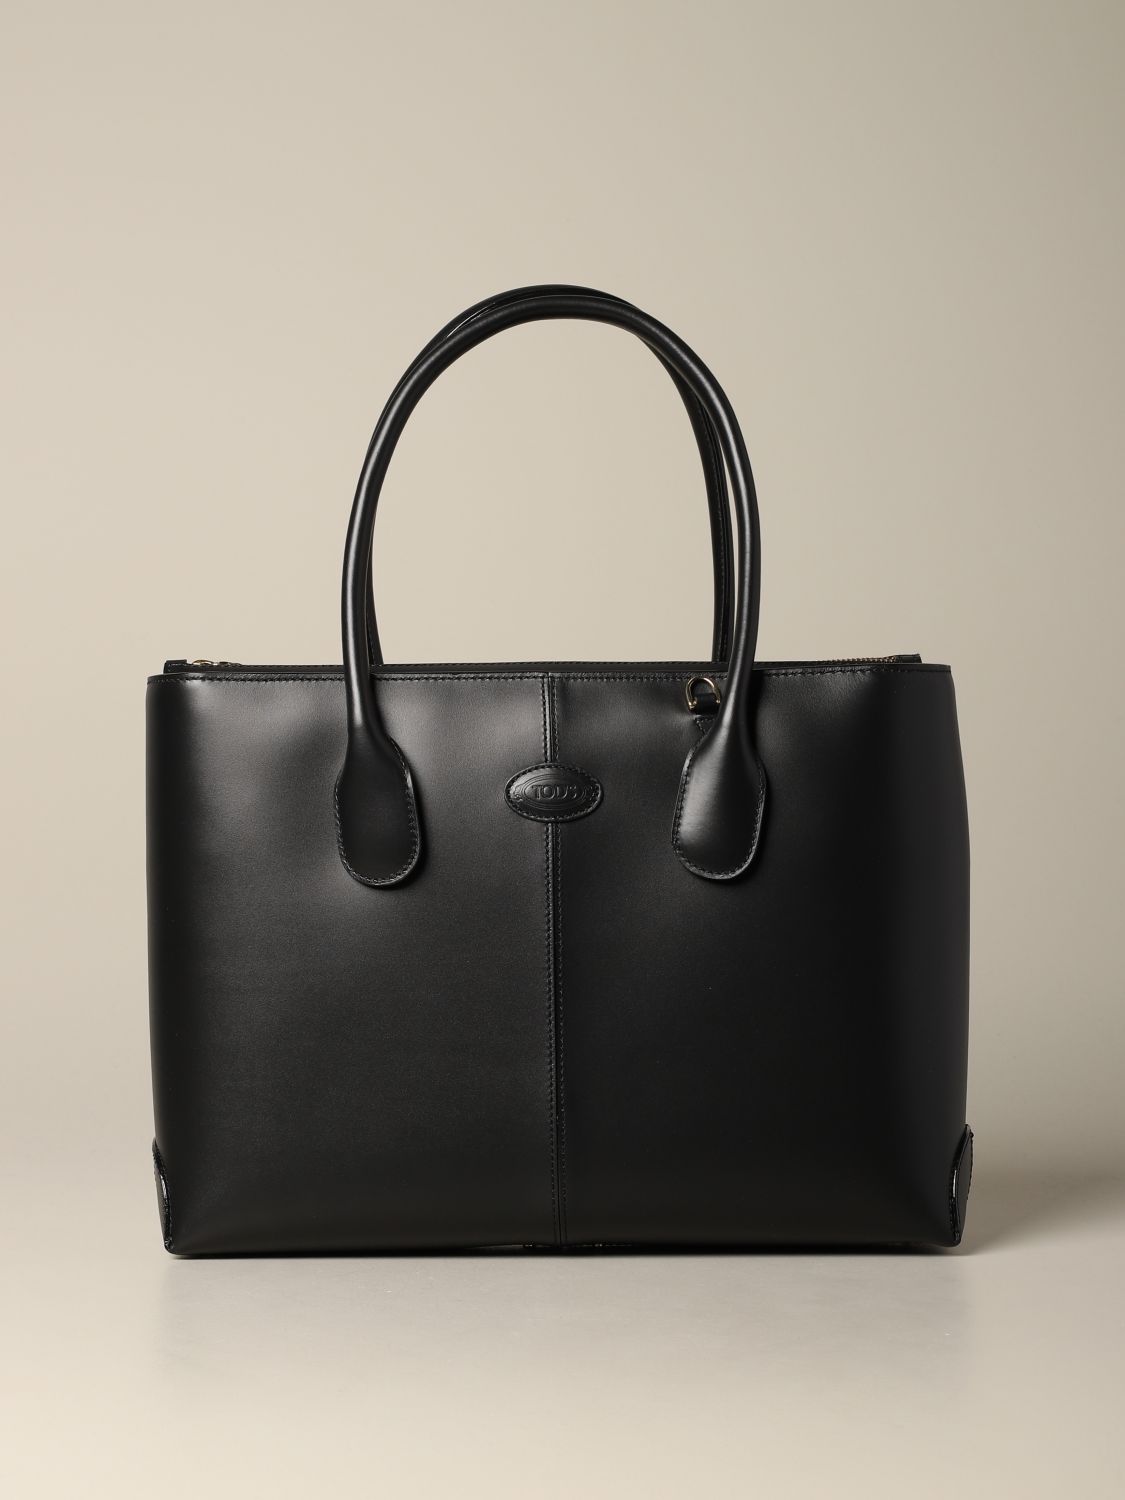 Tods Outlet: Borsa D bag Tod's shopping media in pelle | Borse Tote Tods  Donna Nero | Borse Tote Tods XBWDBAA0300 RII GIGLIO.COM